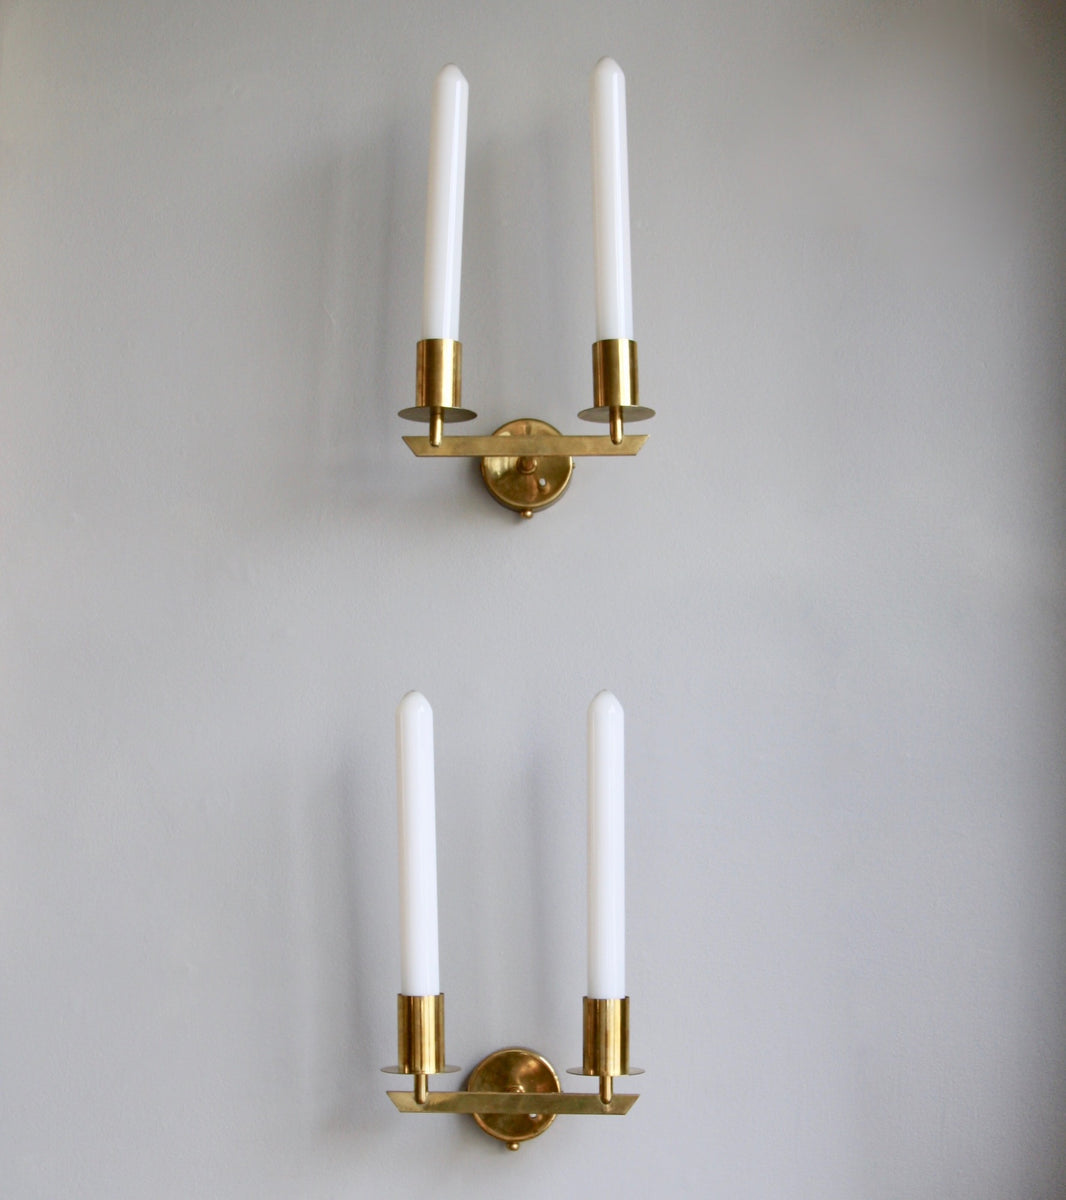 Pair of Brass Wall Sconces Itsu, Finland, C. 1950 - Image 2